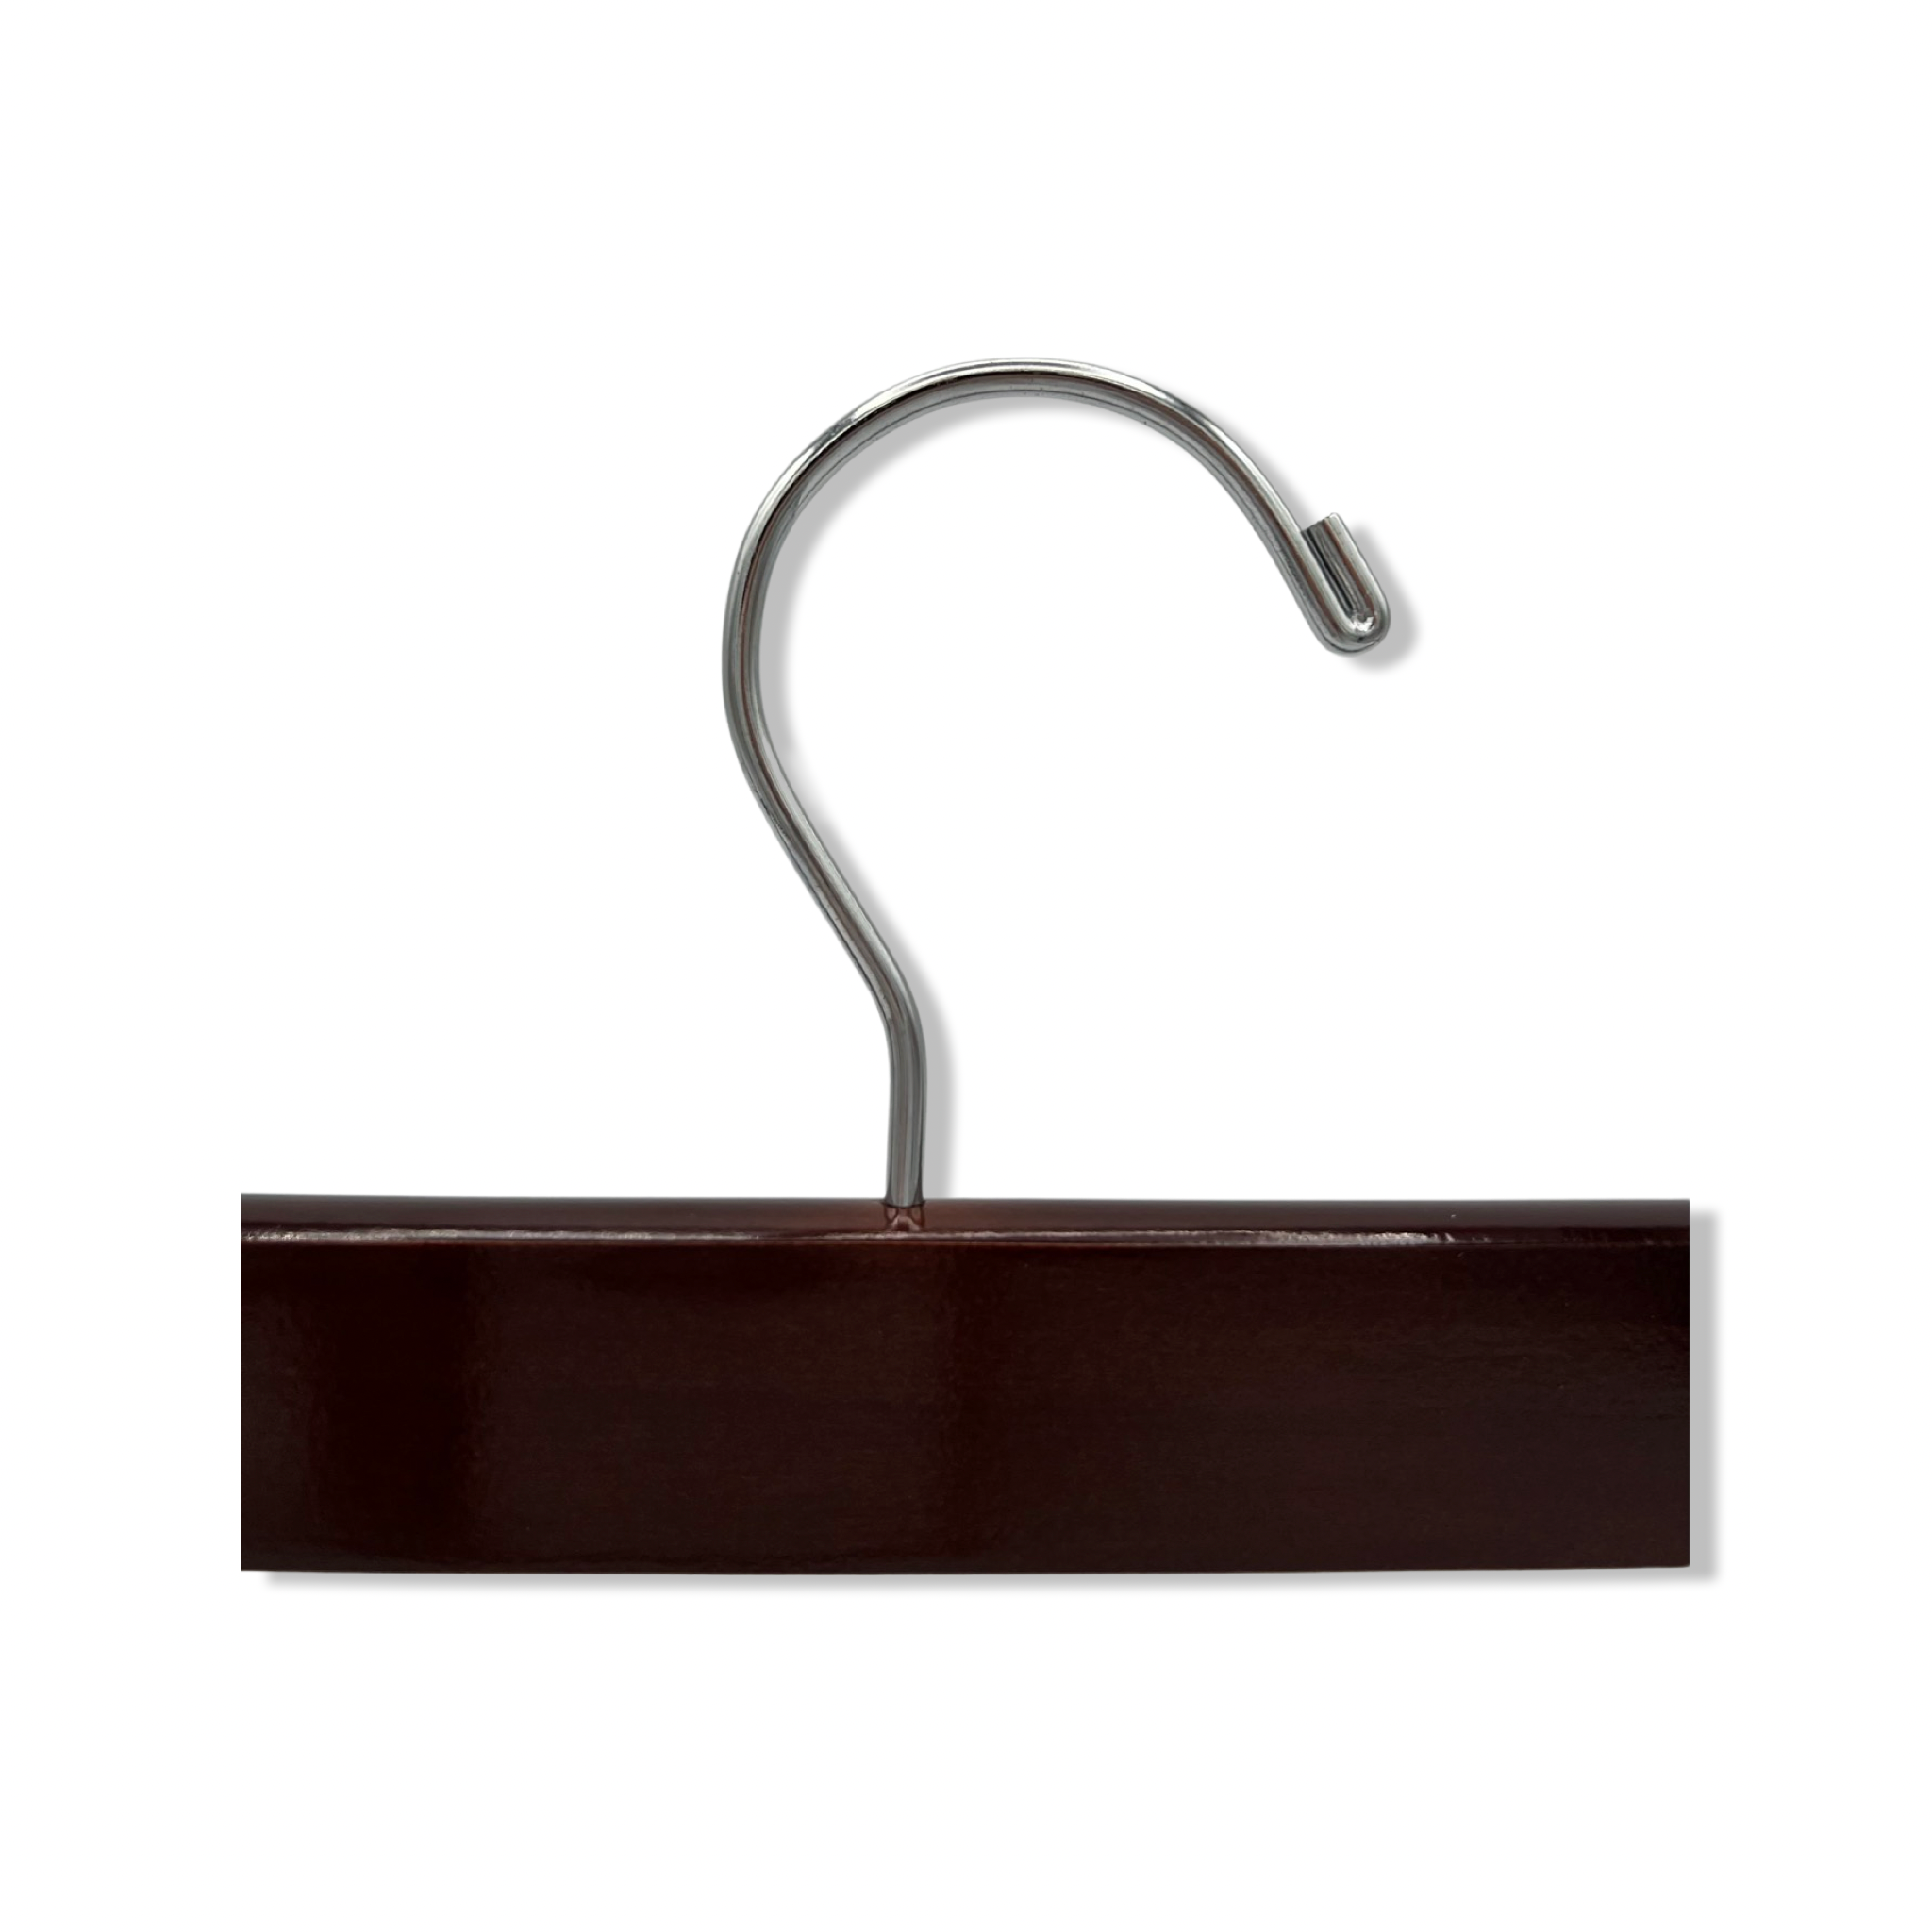 Top of a high quality Dark Walnut Wooden Bottom Hanger for adults with a silver hook facing to the right